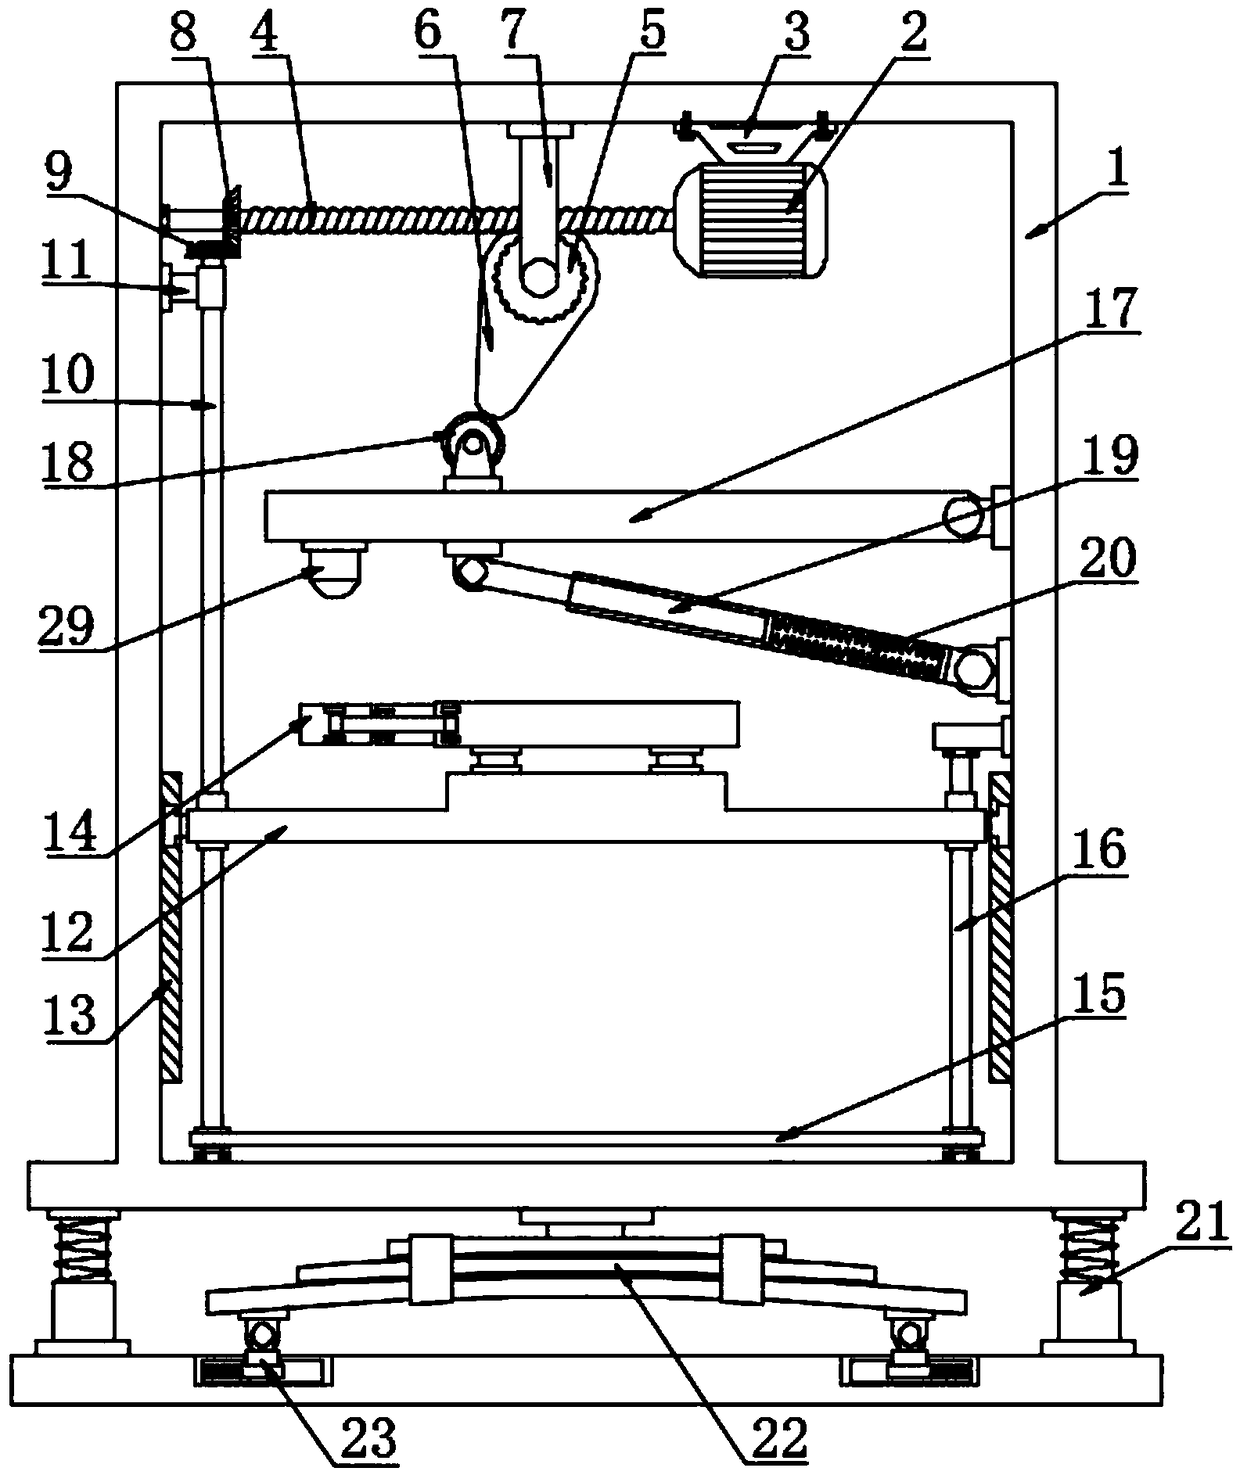 Progressive knocking device for interference fit assembly